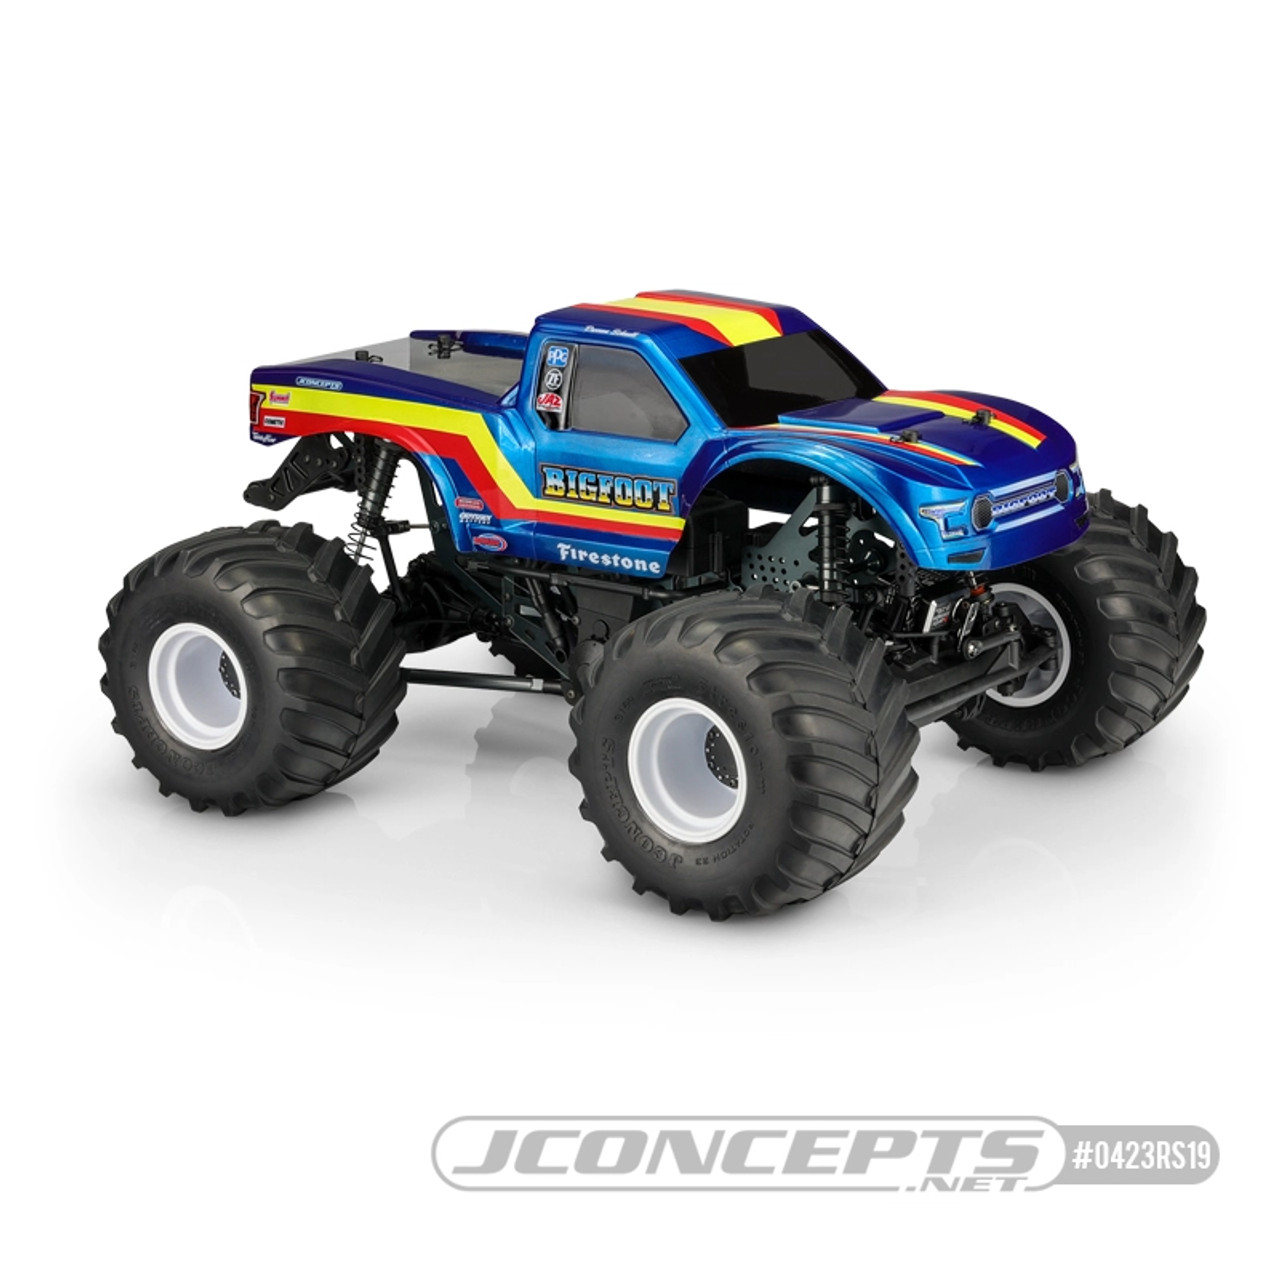 JConcepts 2020 Ford Raptor Body, Bigfoot 19 Racer Stripe, fits Losi LMT & Axial SMT10